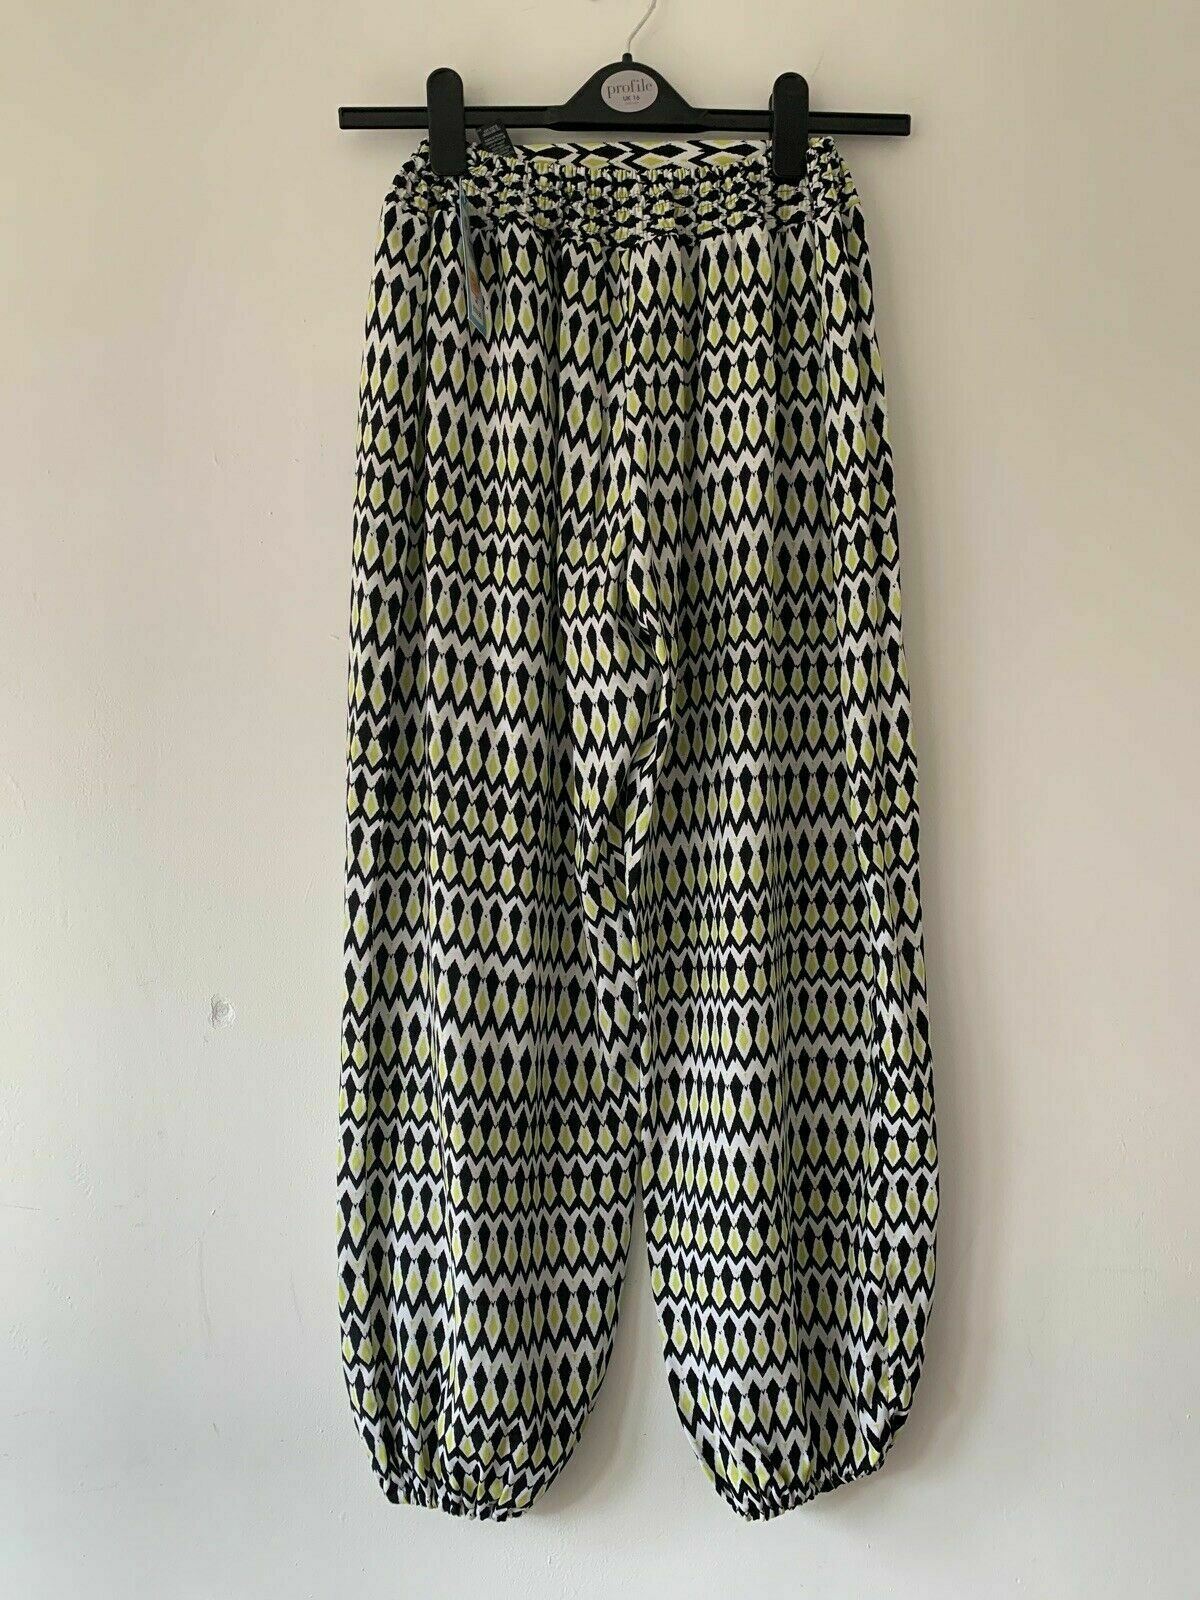 M&S Beachwear Tapered Trousers Elasticated Waist Size Small